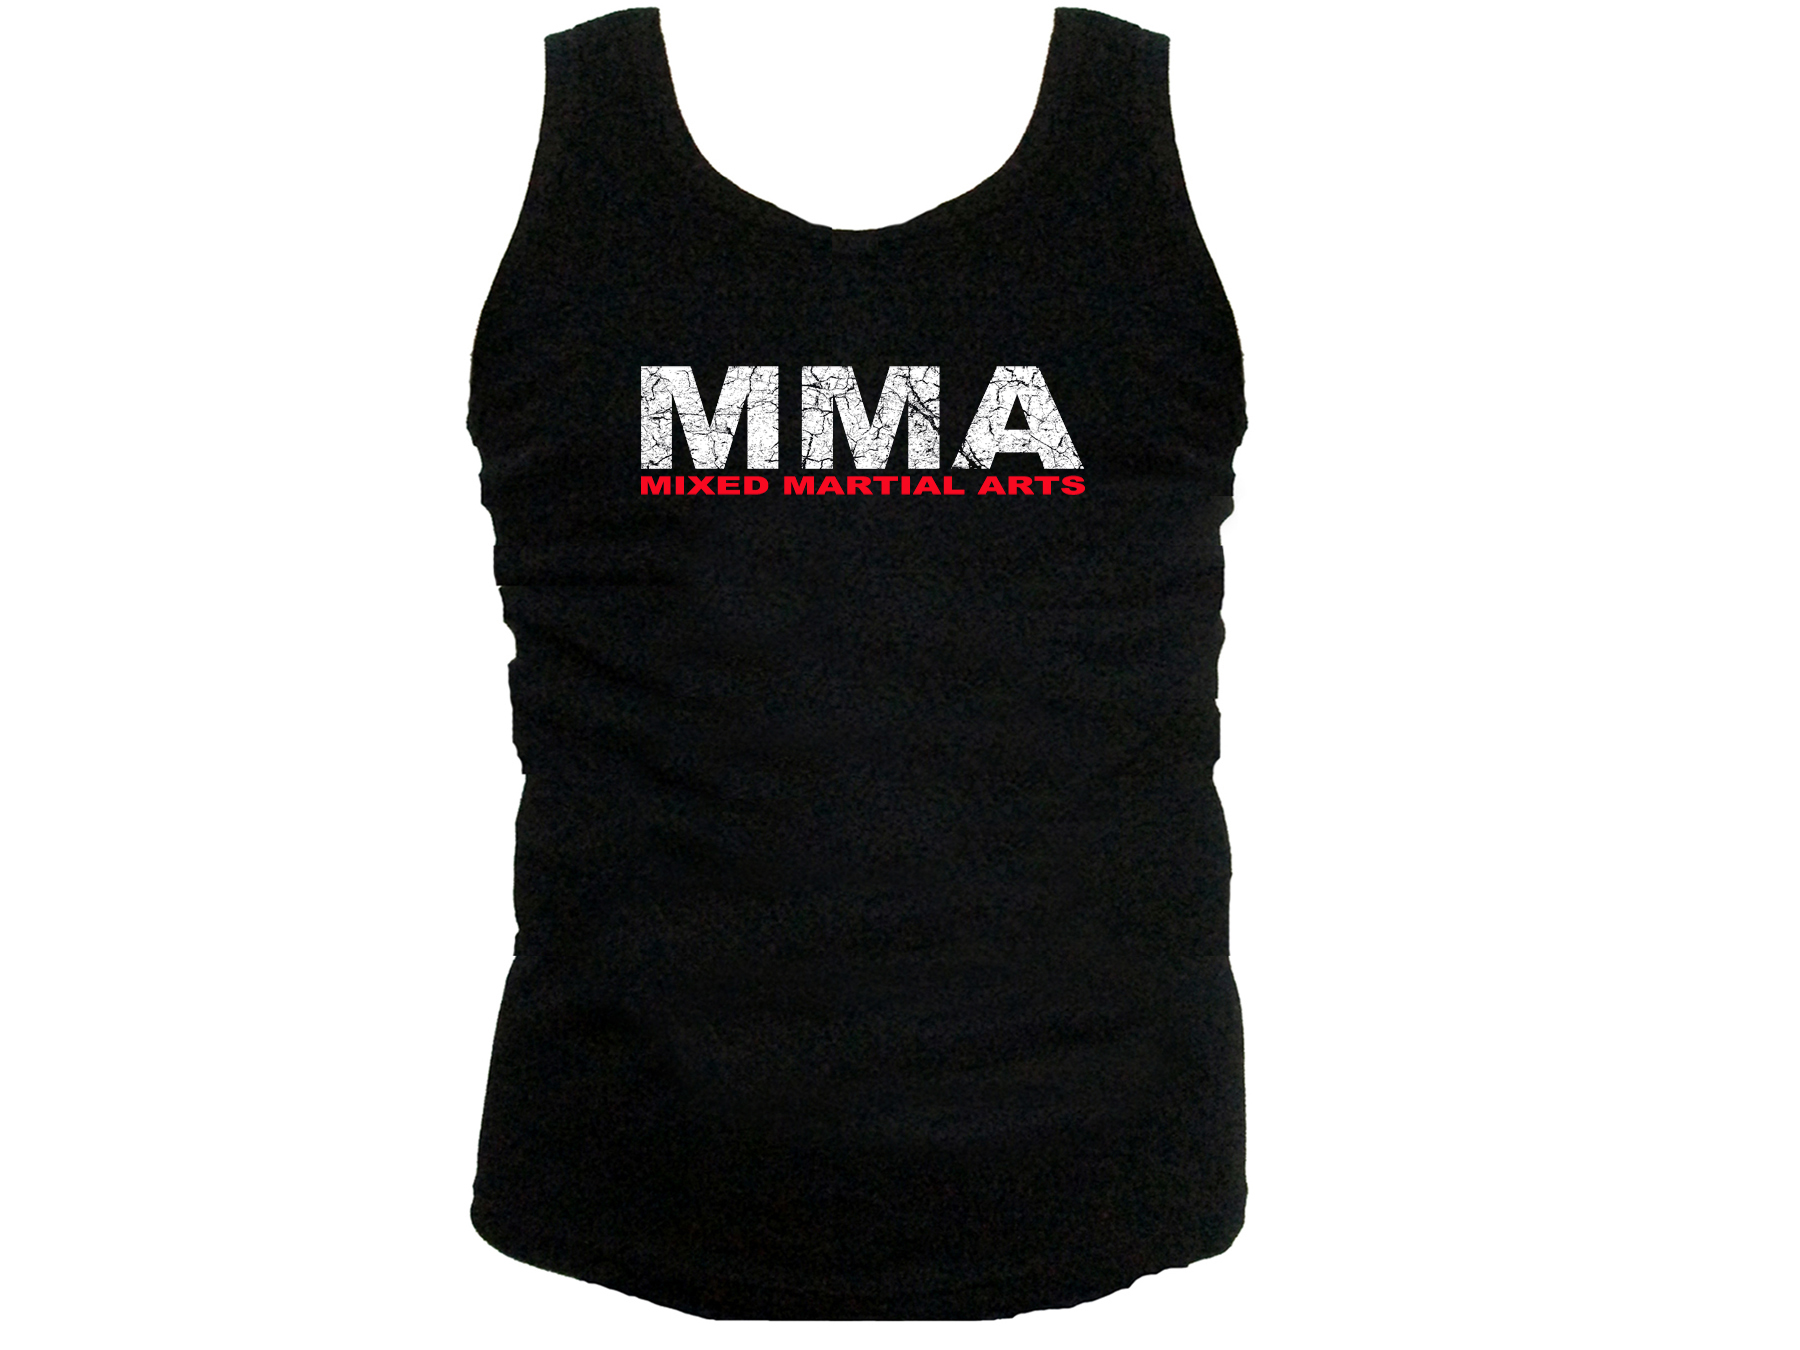 MMA mixed martial arts distressed look gym tank top